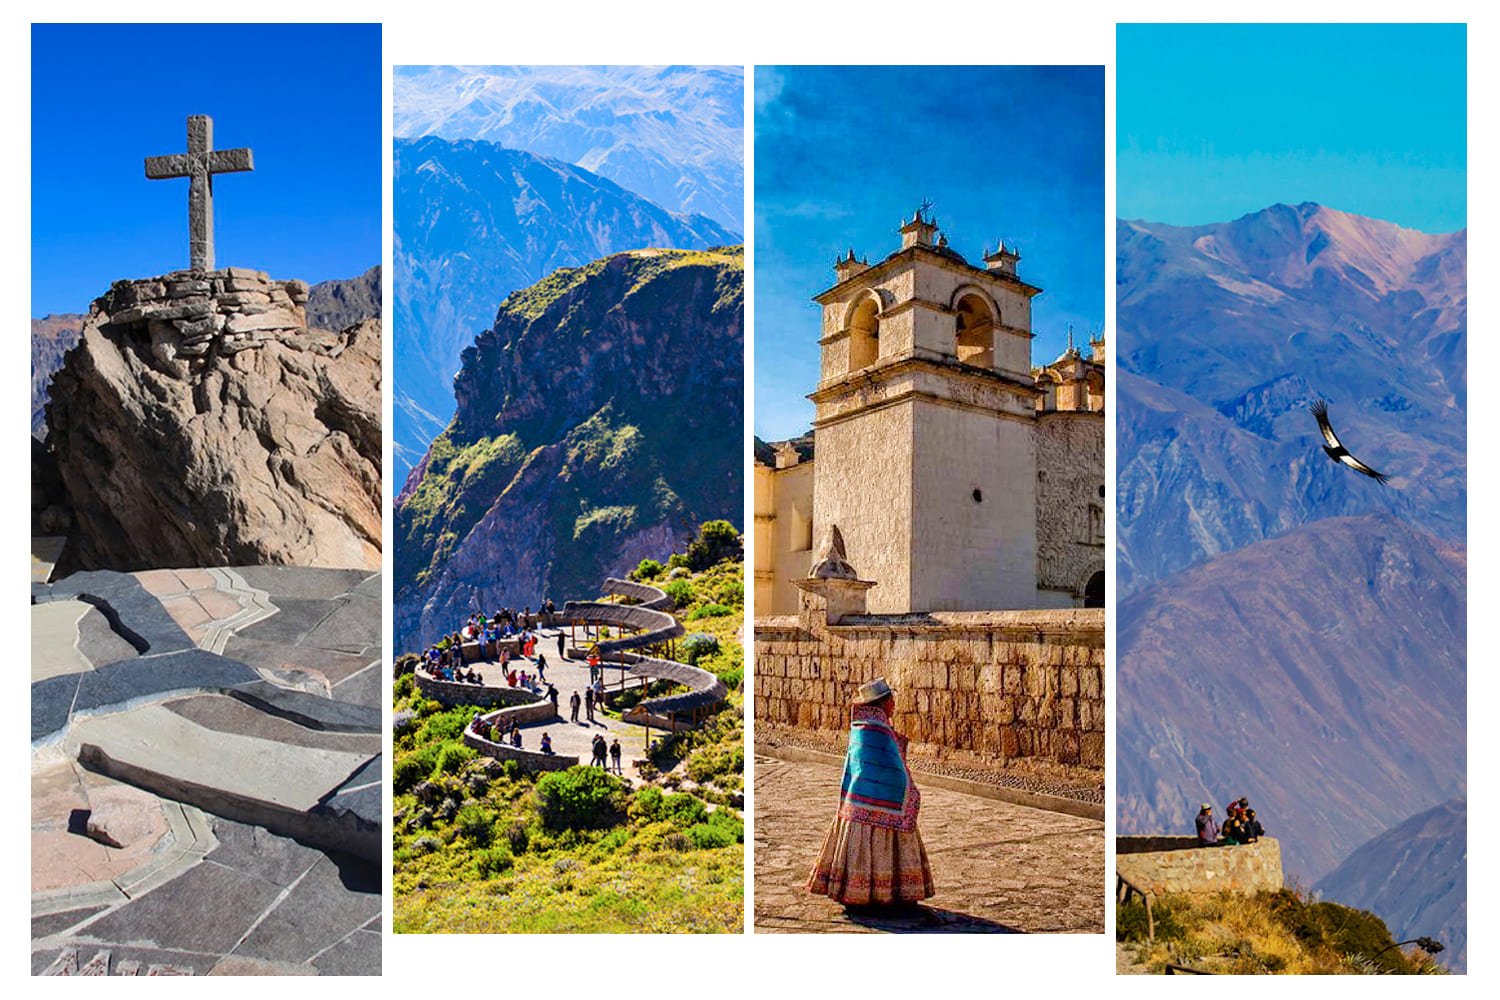 Colca Canyon and the flight of the condor